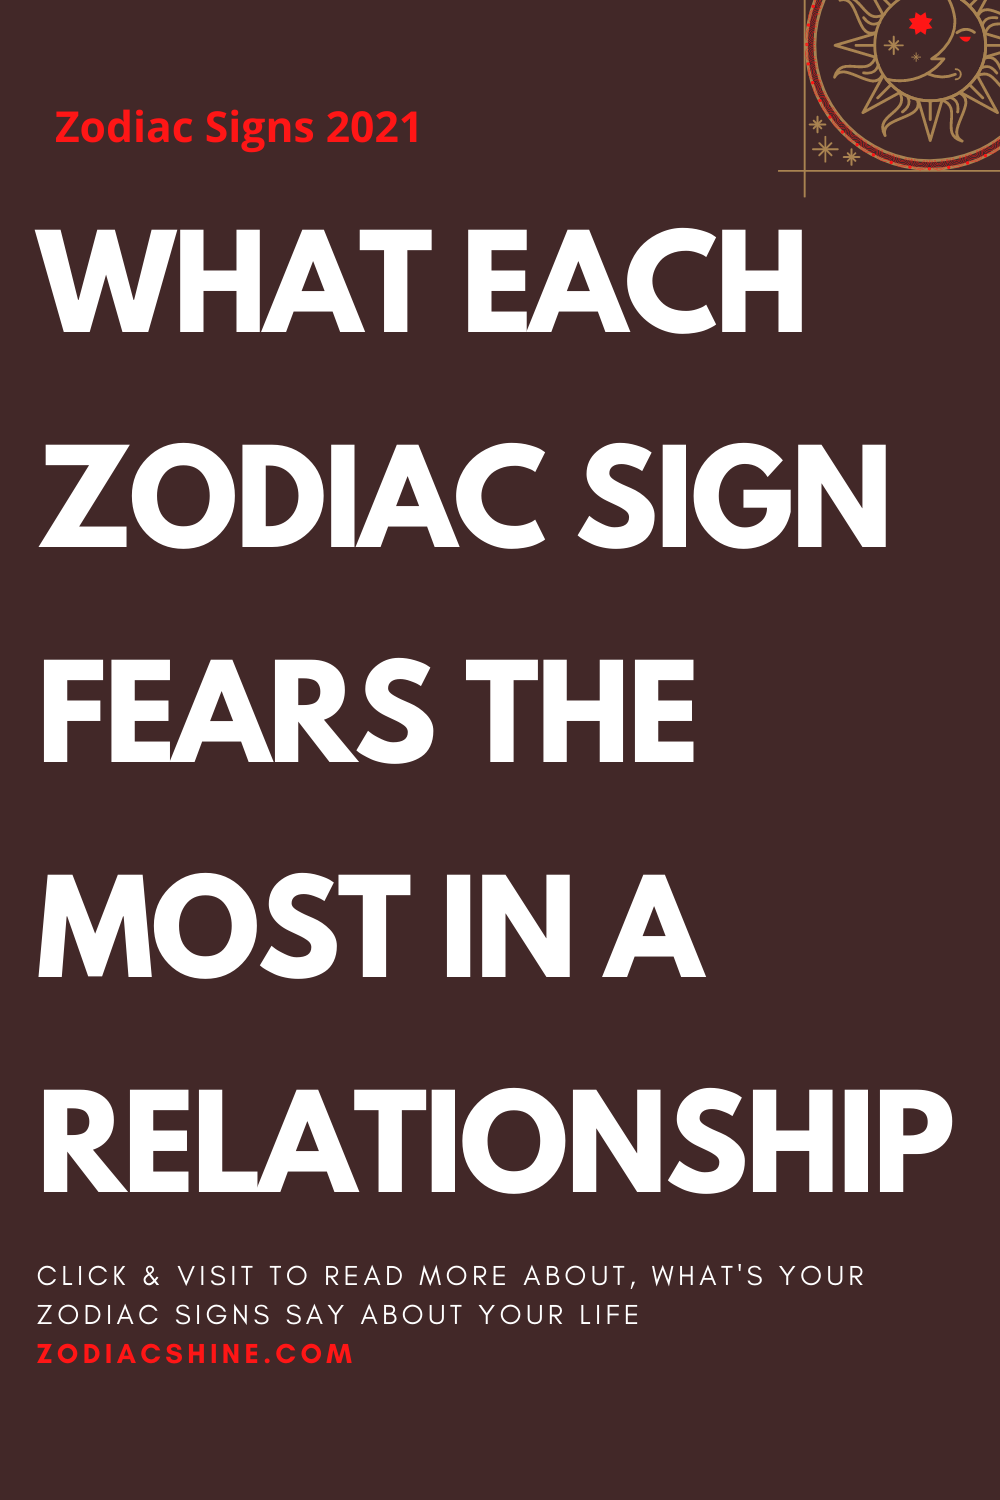 WHAT EACH ZODIAC SIGN FEARS THE MOST IN A RELATIONSHIP